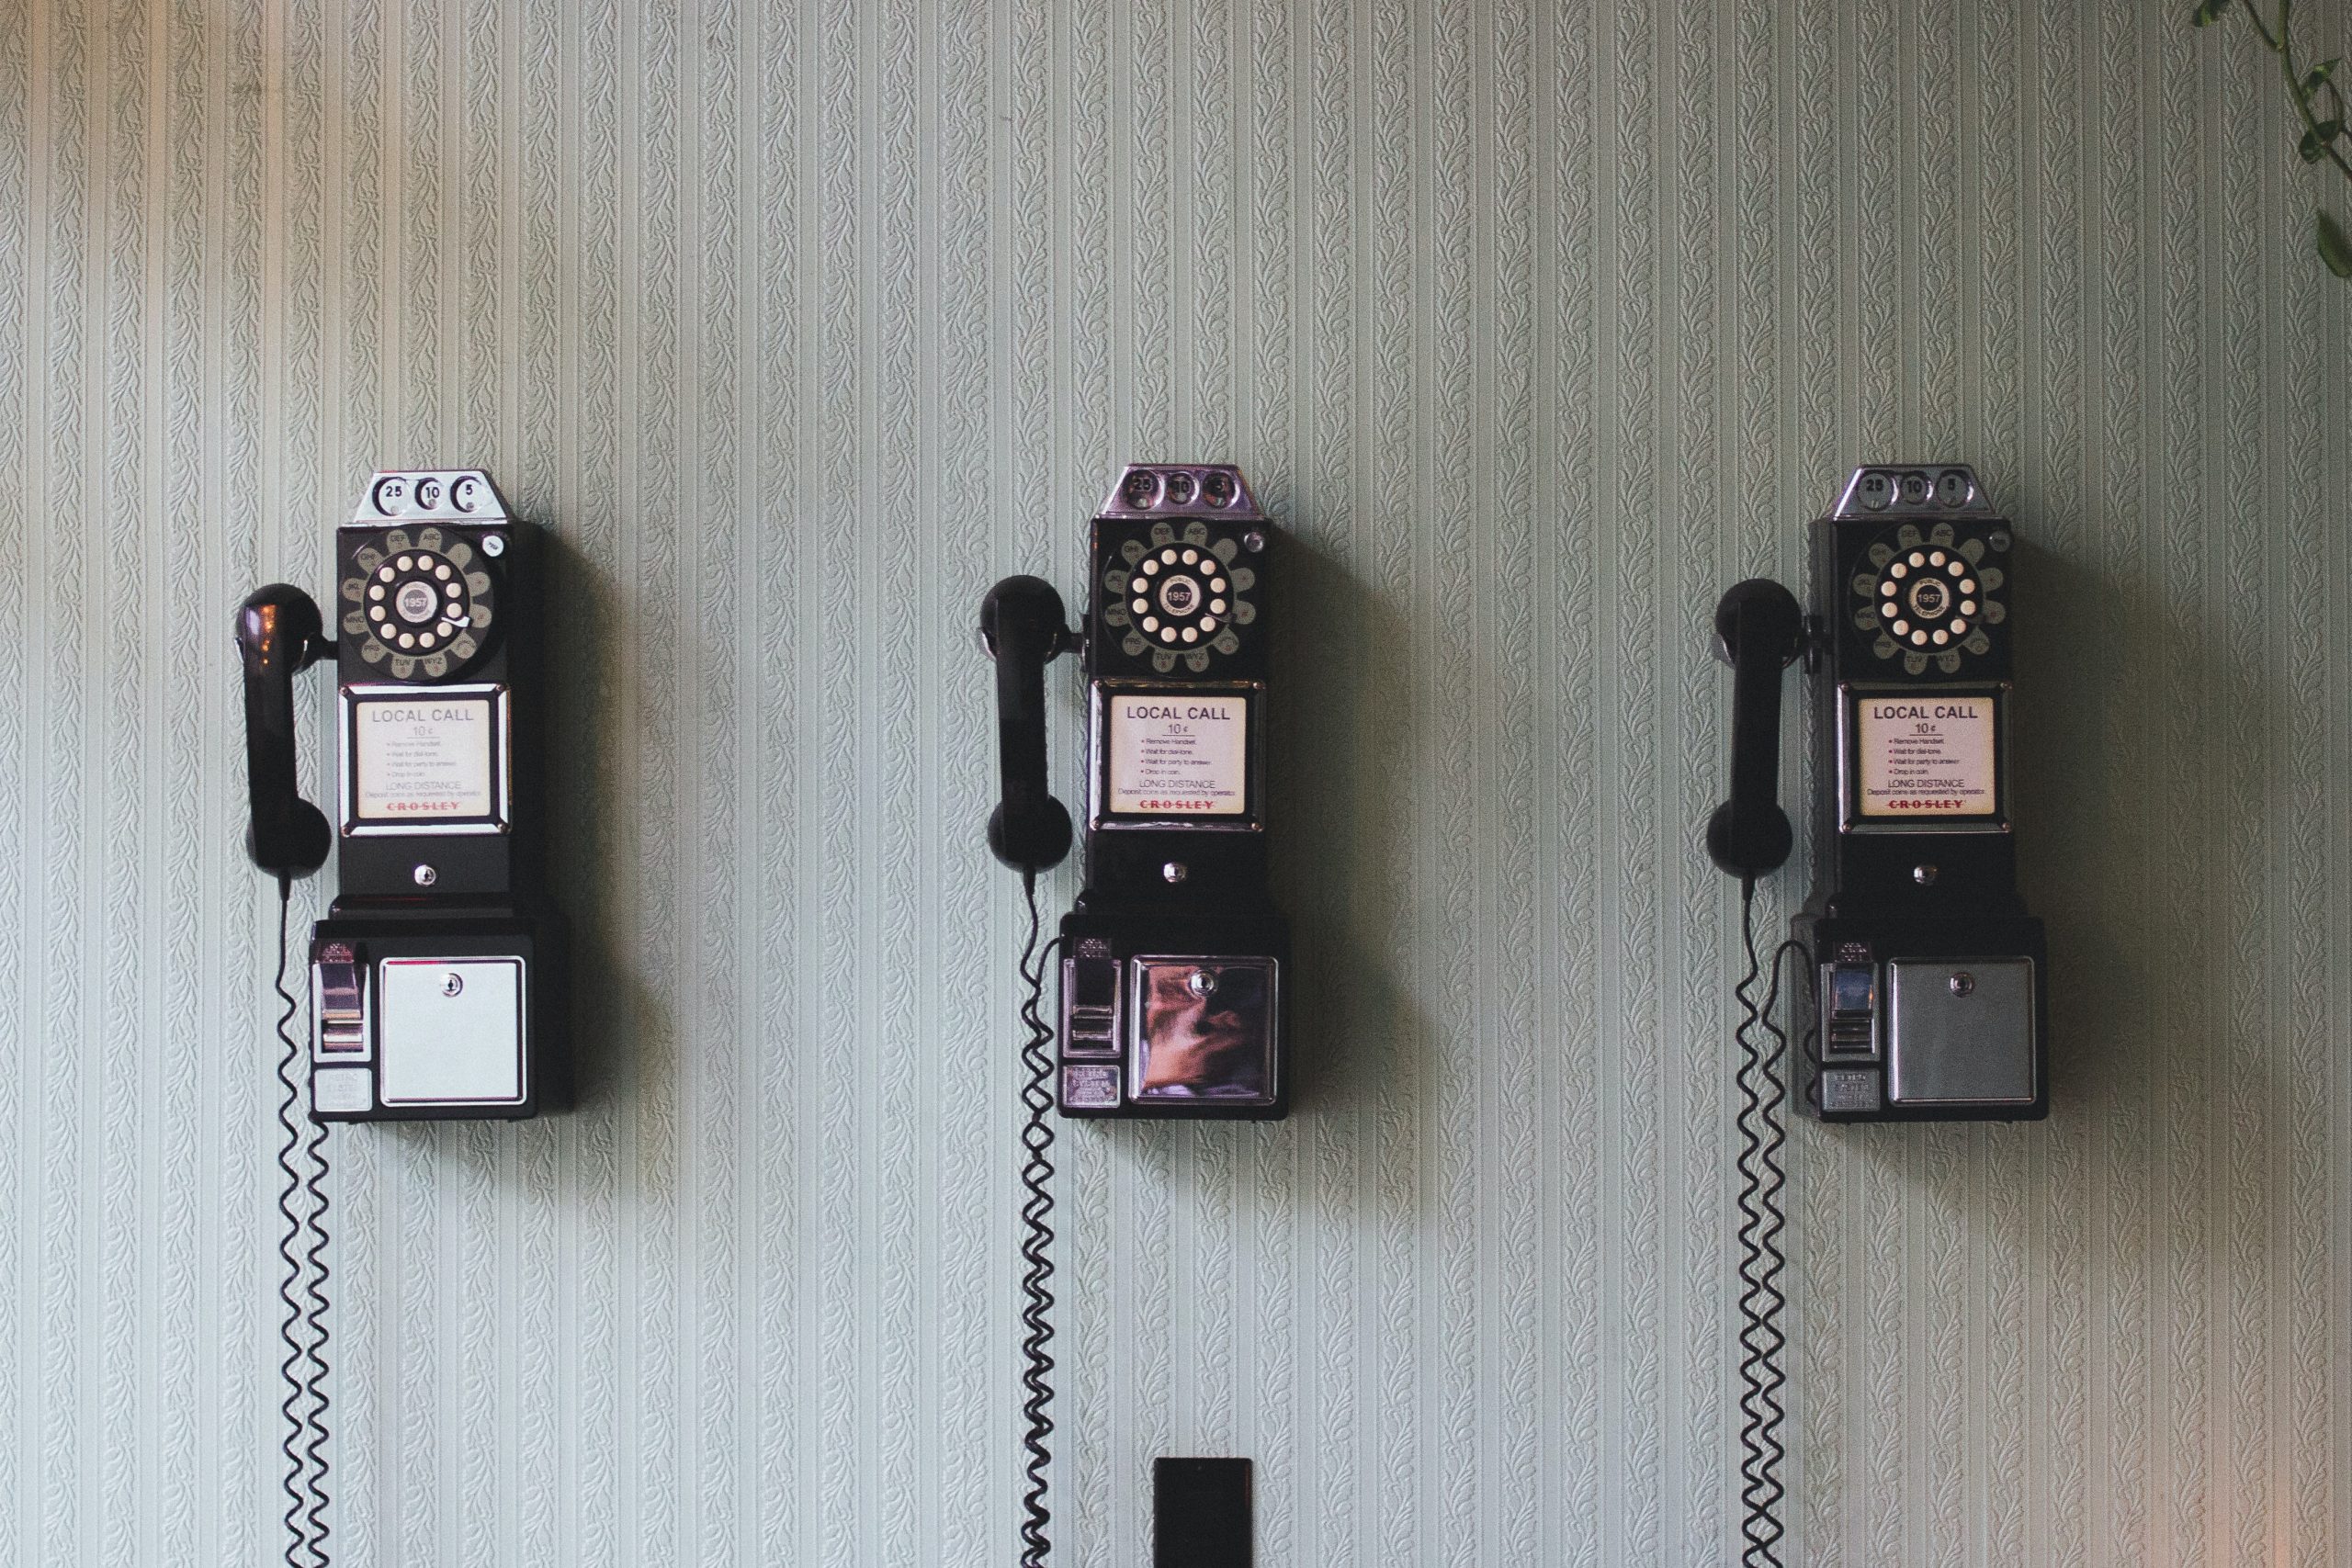 Three telephones hung on the wall